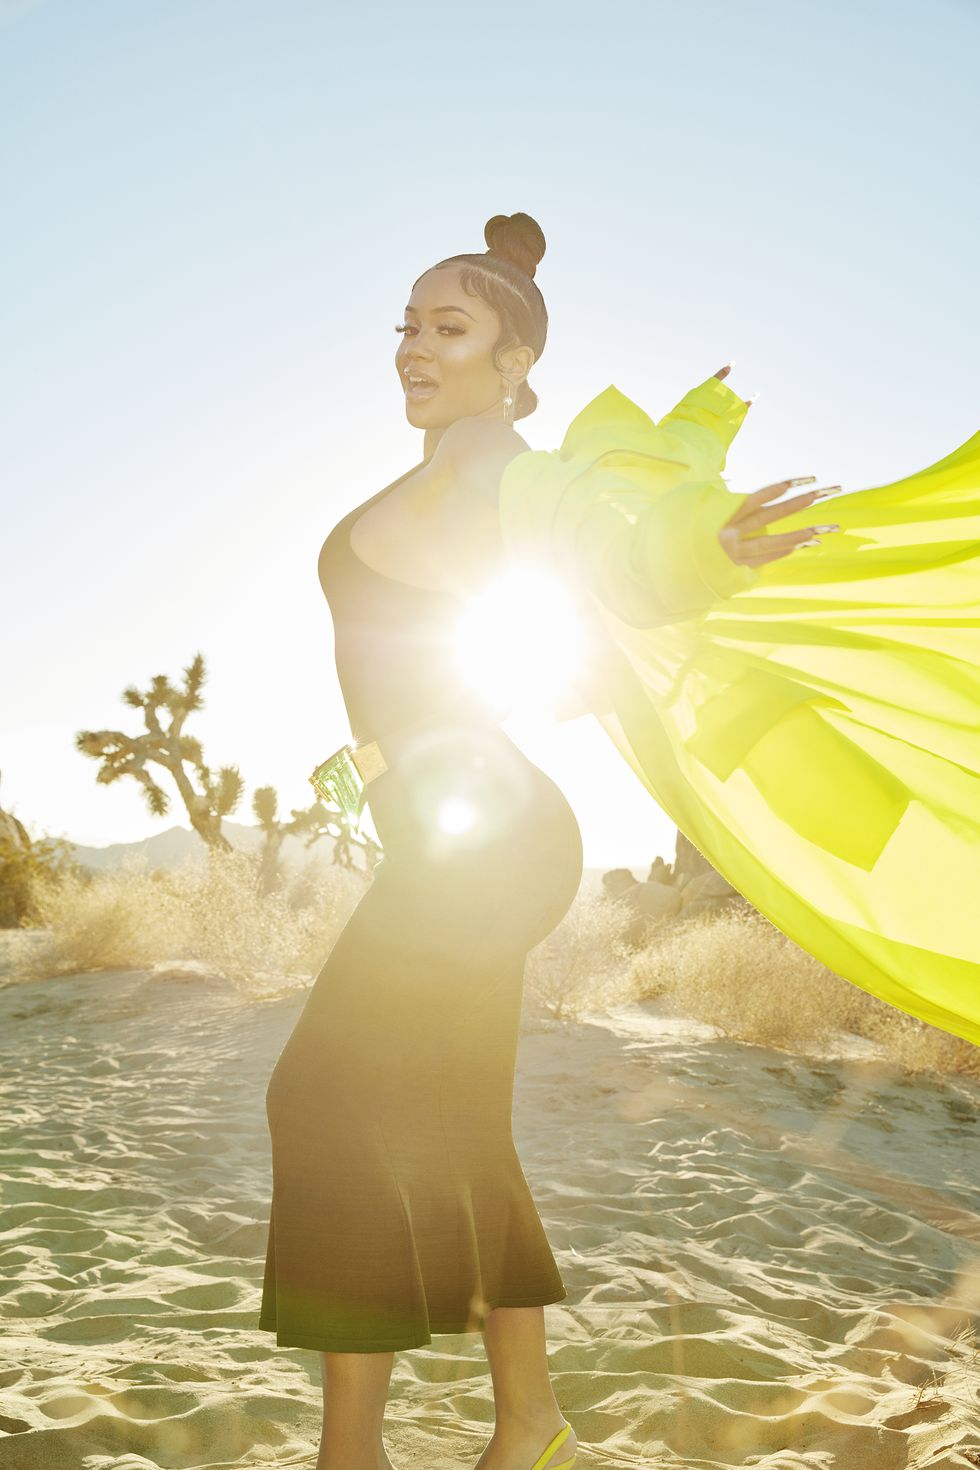 singer saweetie, wearing a dress, coat, and fanny pack, with hands up behind her with coat flying in the wind, in front of a sky and desert backdrop